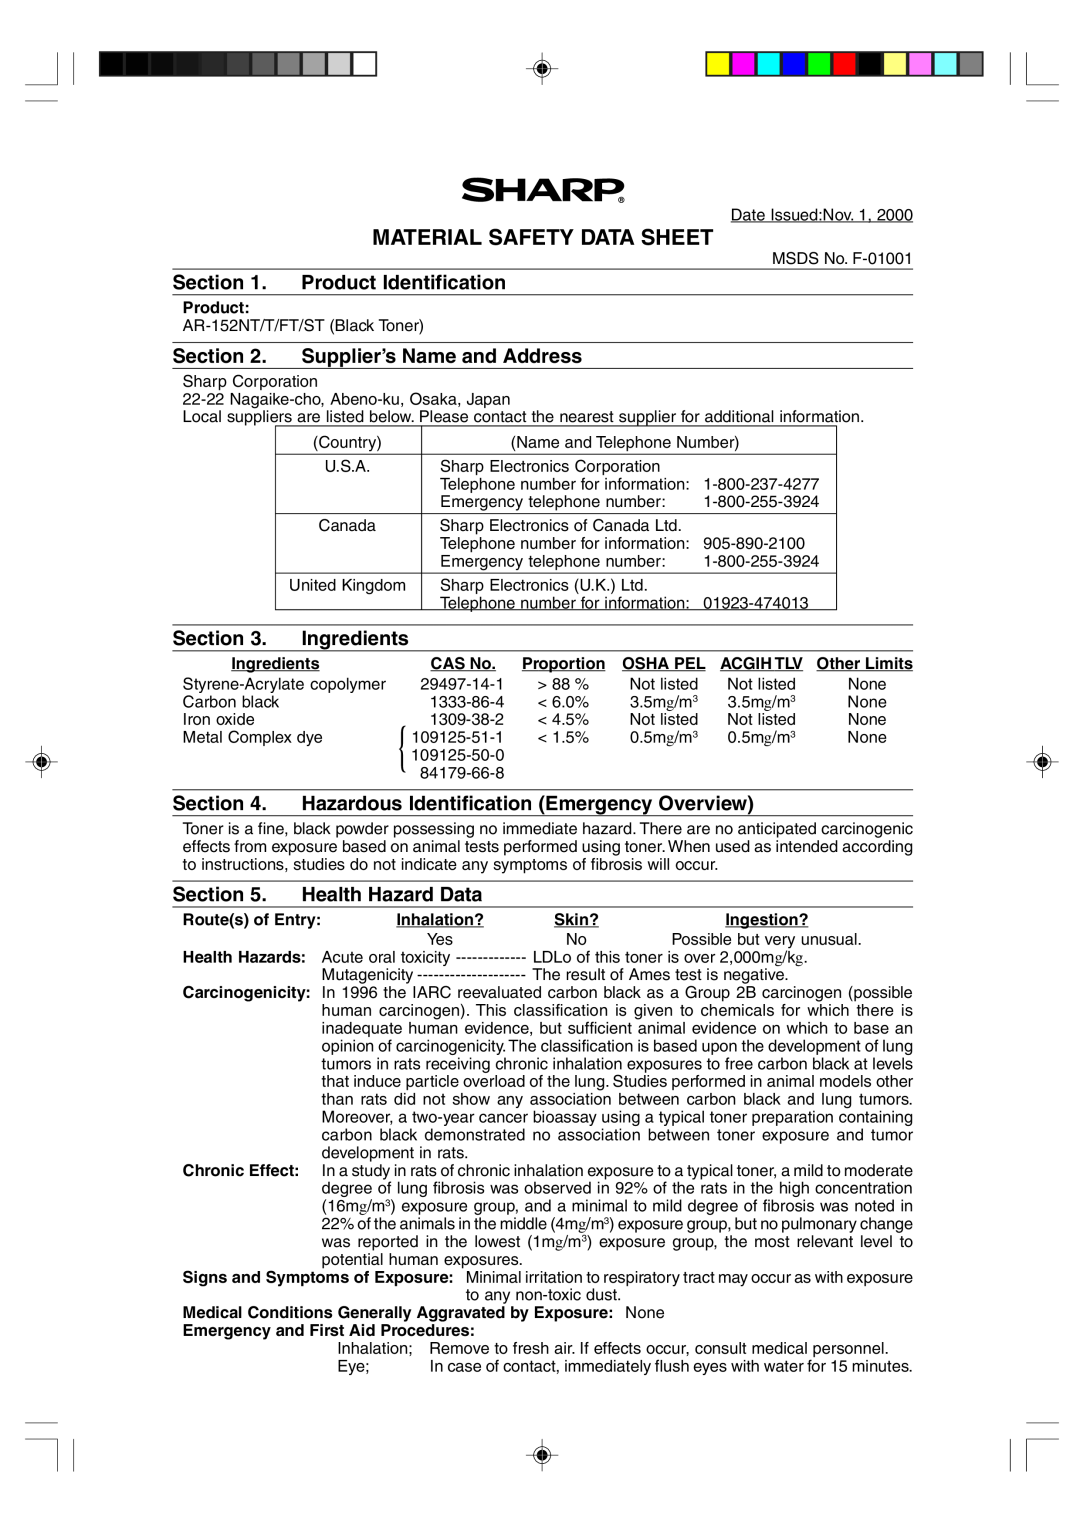 Sharp AR-F152 Material Safety Data Sheet, Product, Ingredients, CAS No. Proportion OSHA PEL ACGIH TLV Other Limits, Skin? 